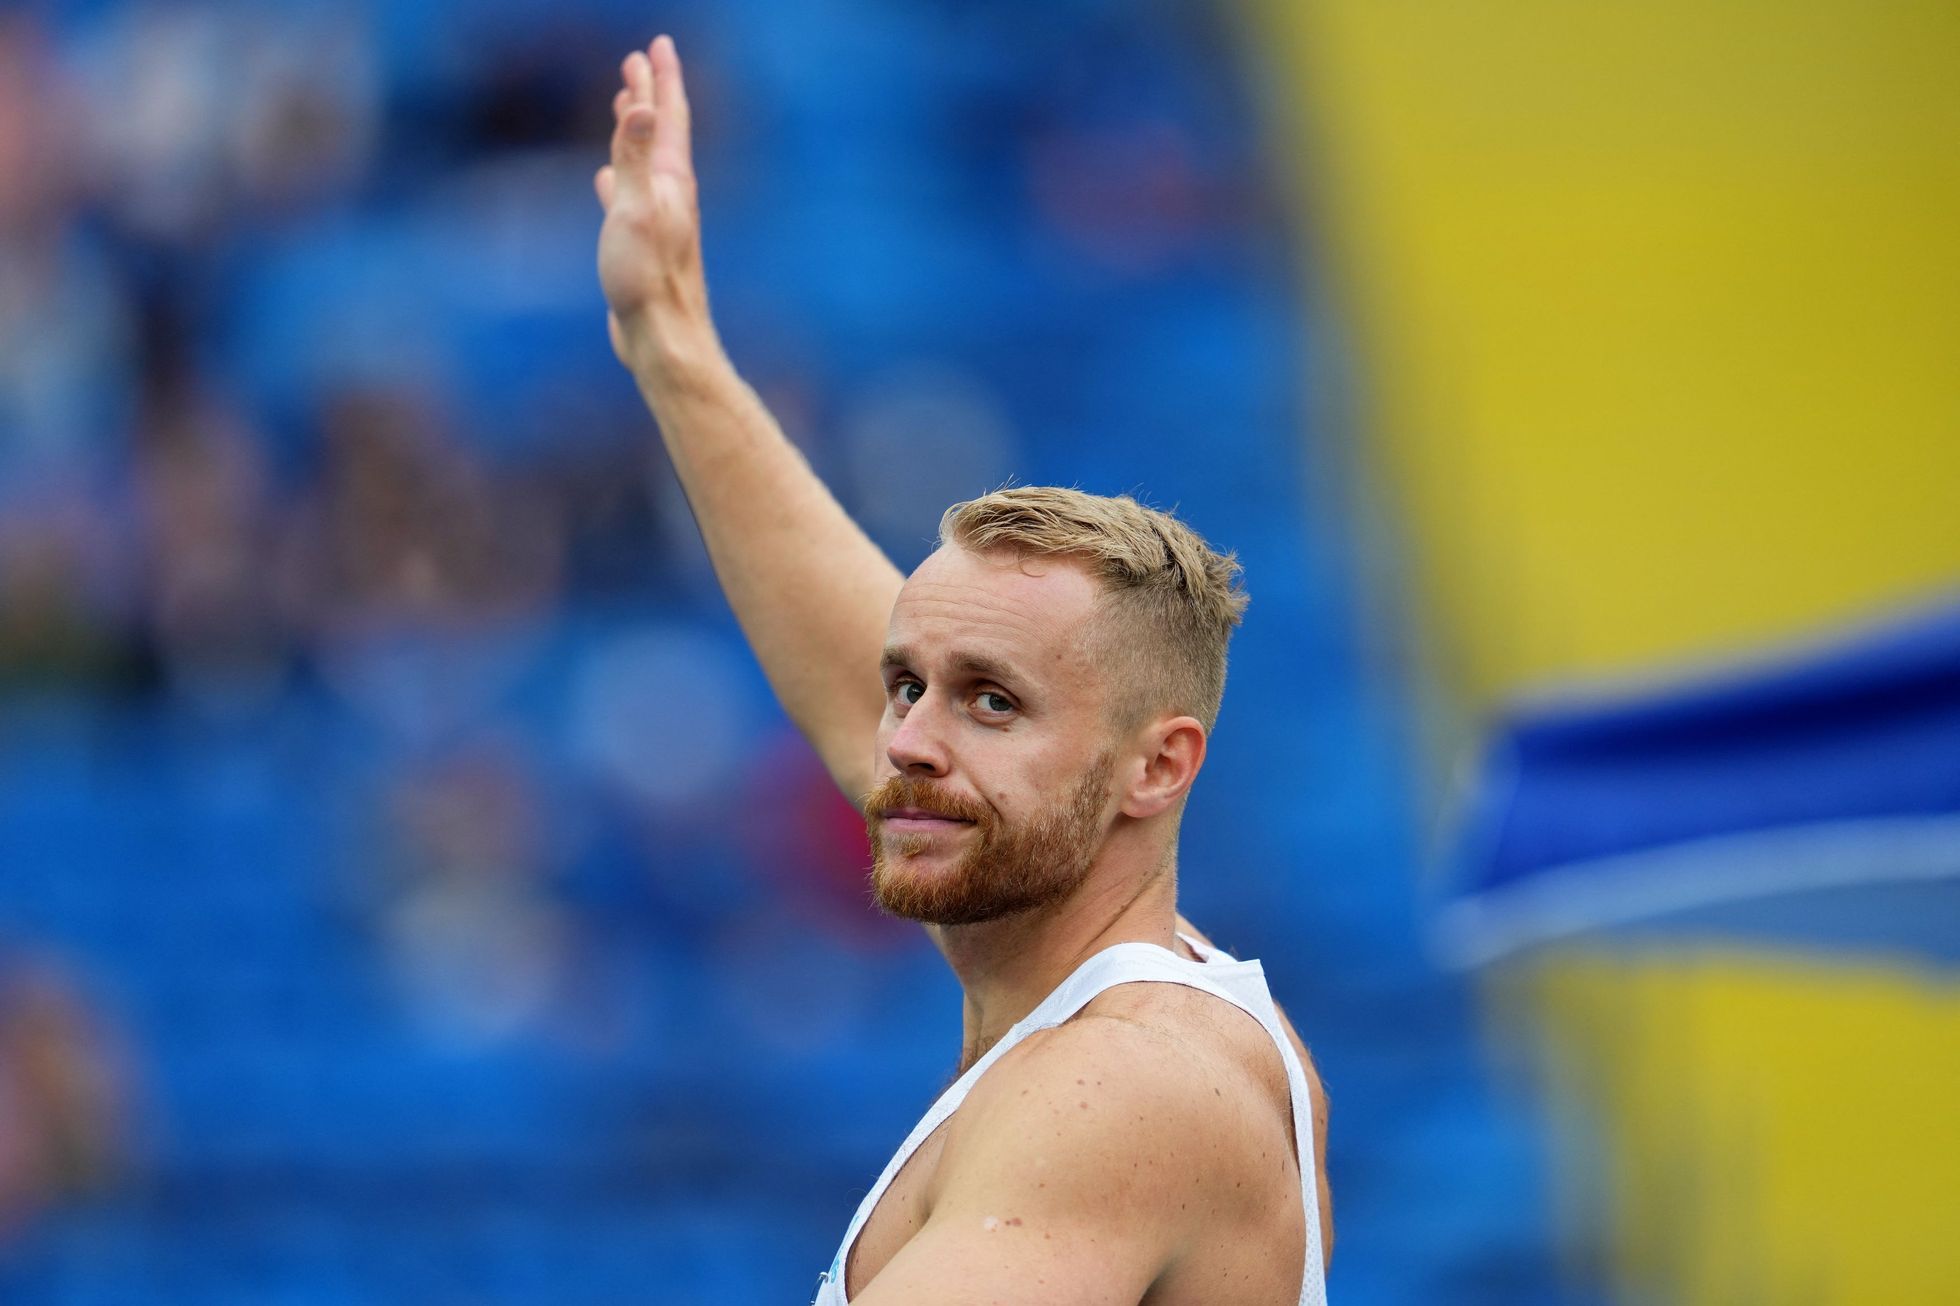 Javelin thrower Vadlejch qualified for the World Championship final, high thrower Hrubá was eliminated